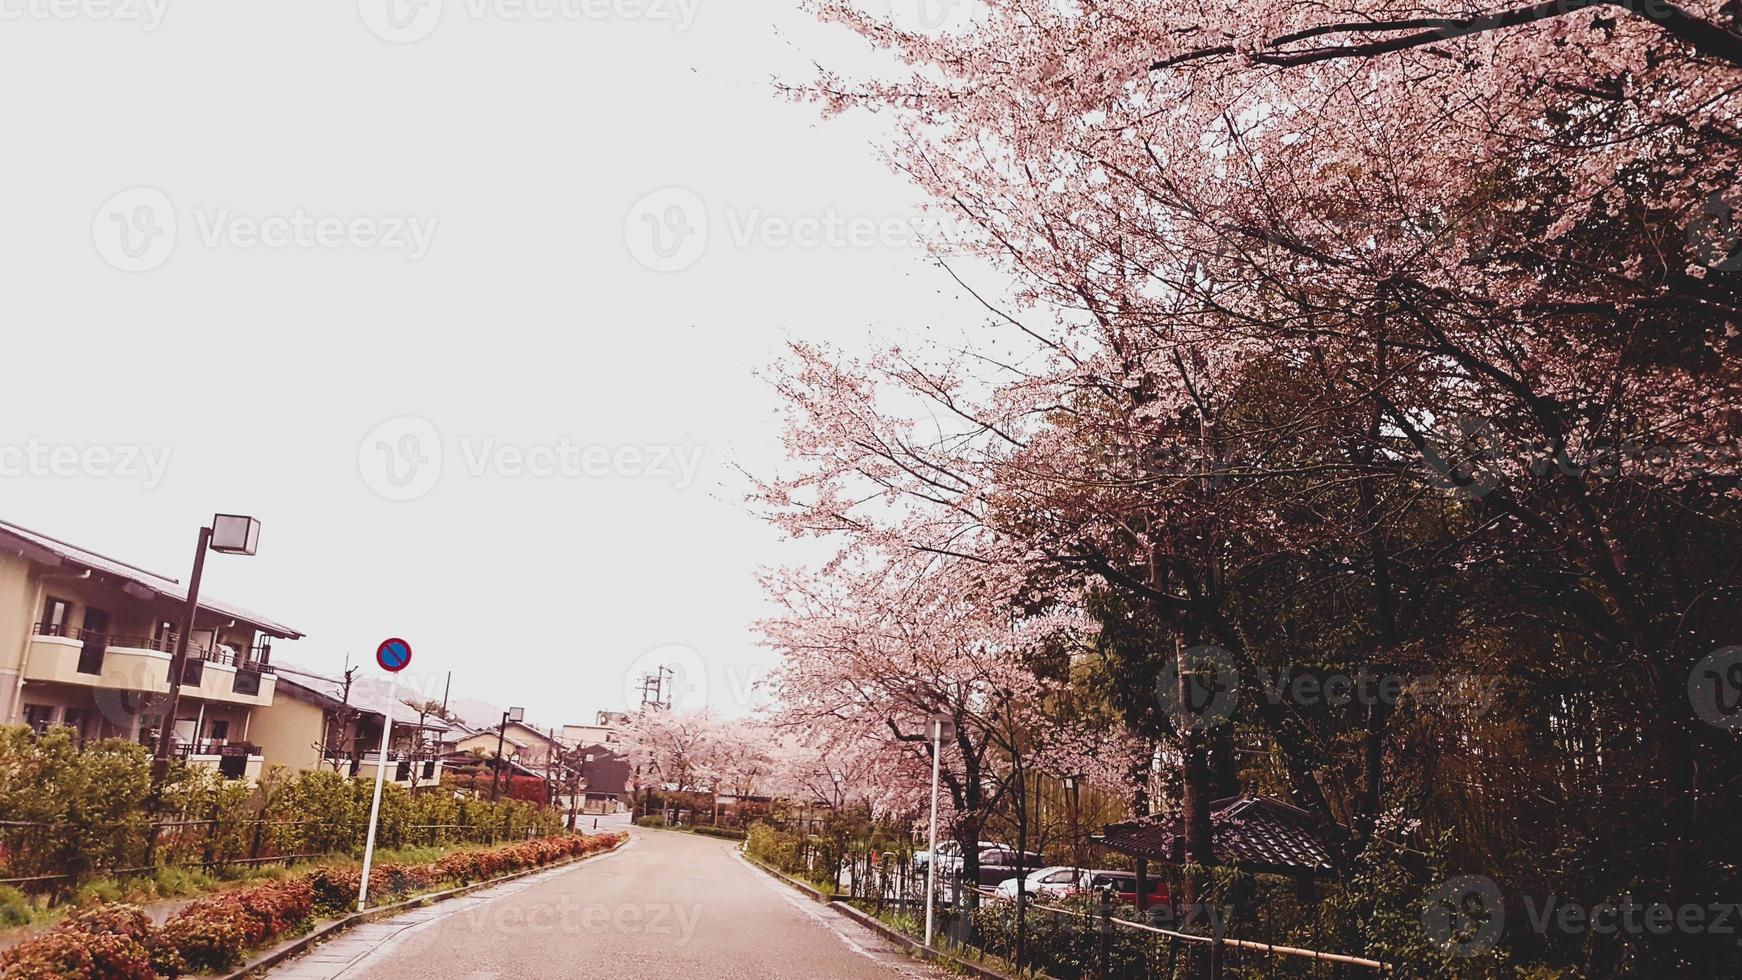 Cherry blossoms are blooming in a village in Kyoto. photo